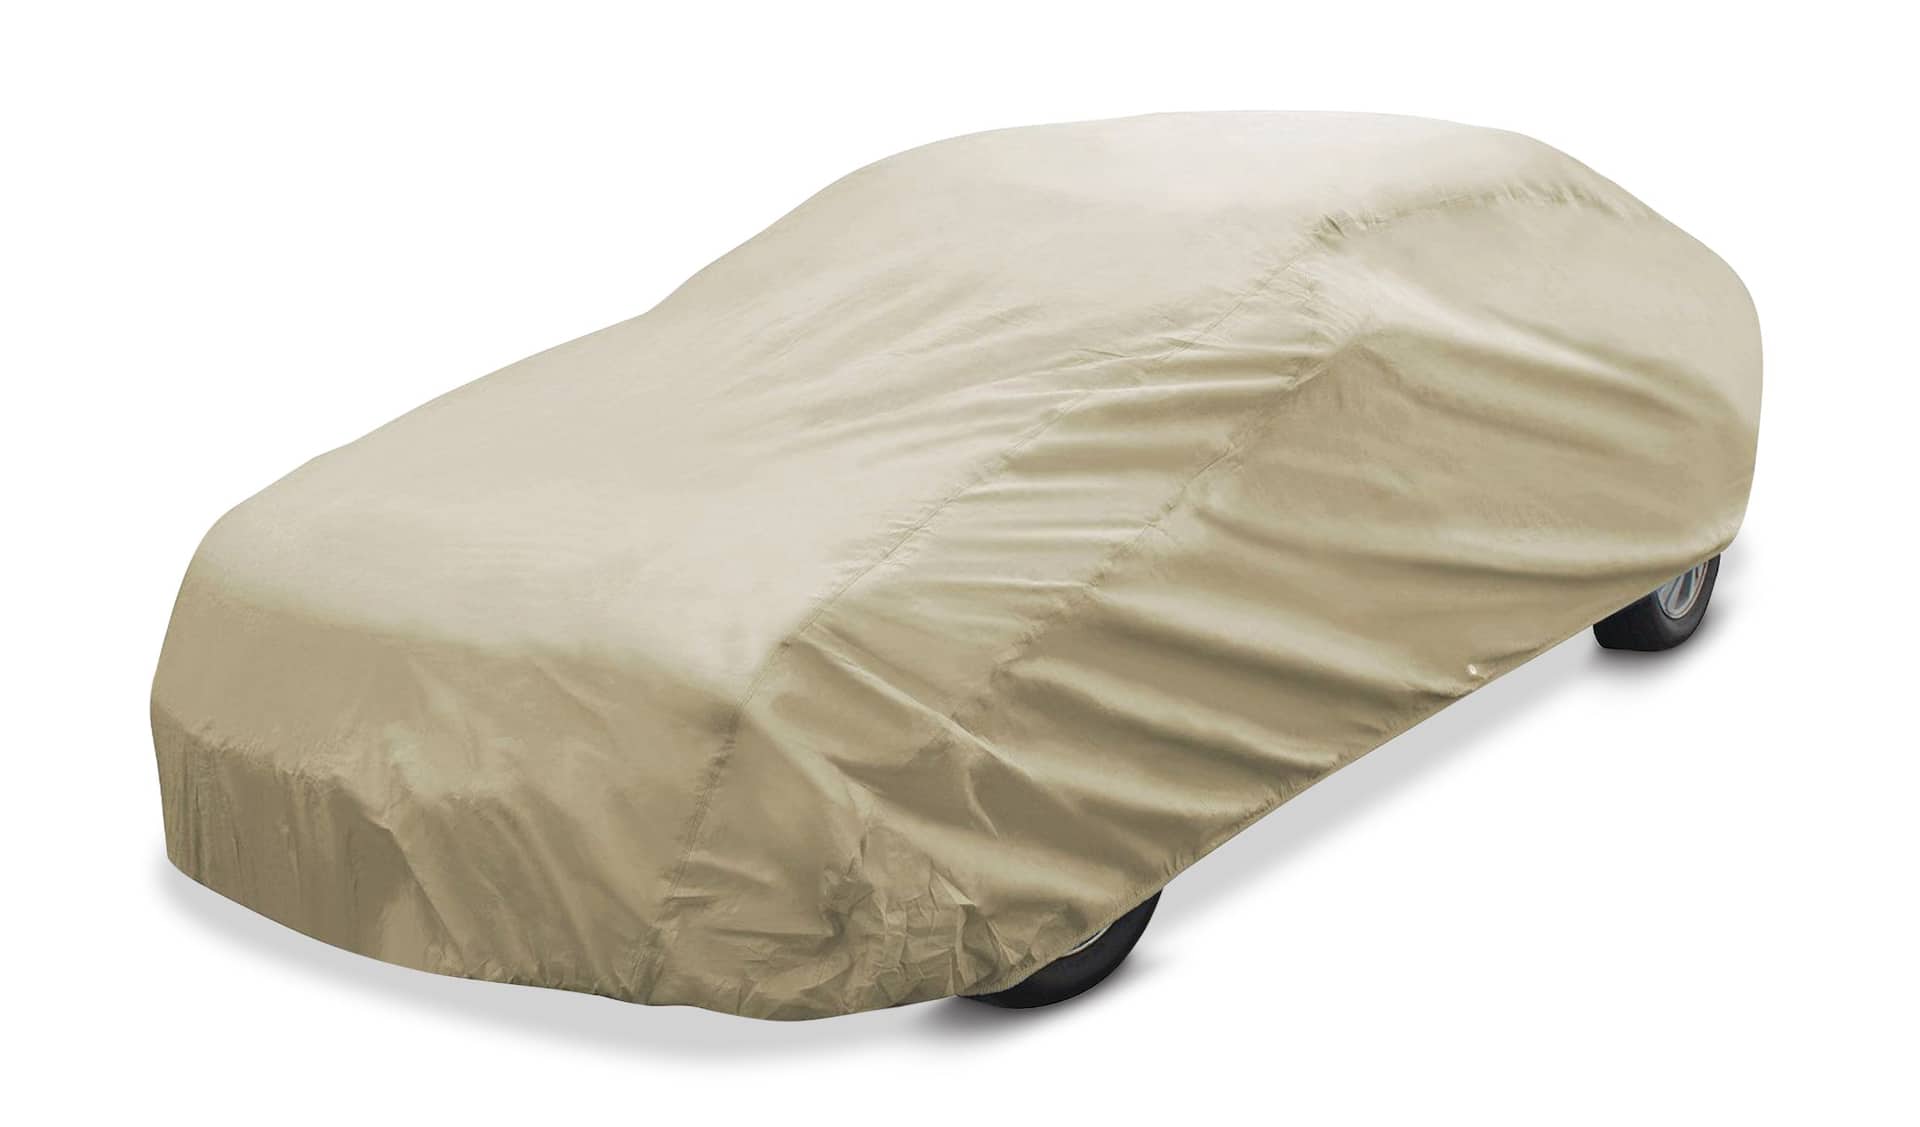 https://media-www.canadiantire.ca/product/automotive/car-care-accessories/auto-shelters-and-car-covers/0412262/2262-simoniz-x-large-car-cover-097e231b-a063-4af6-a713-46656a1c2f01-jpgrendition.jpg